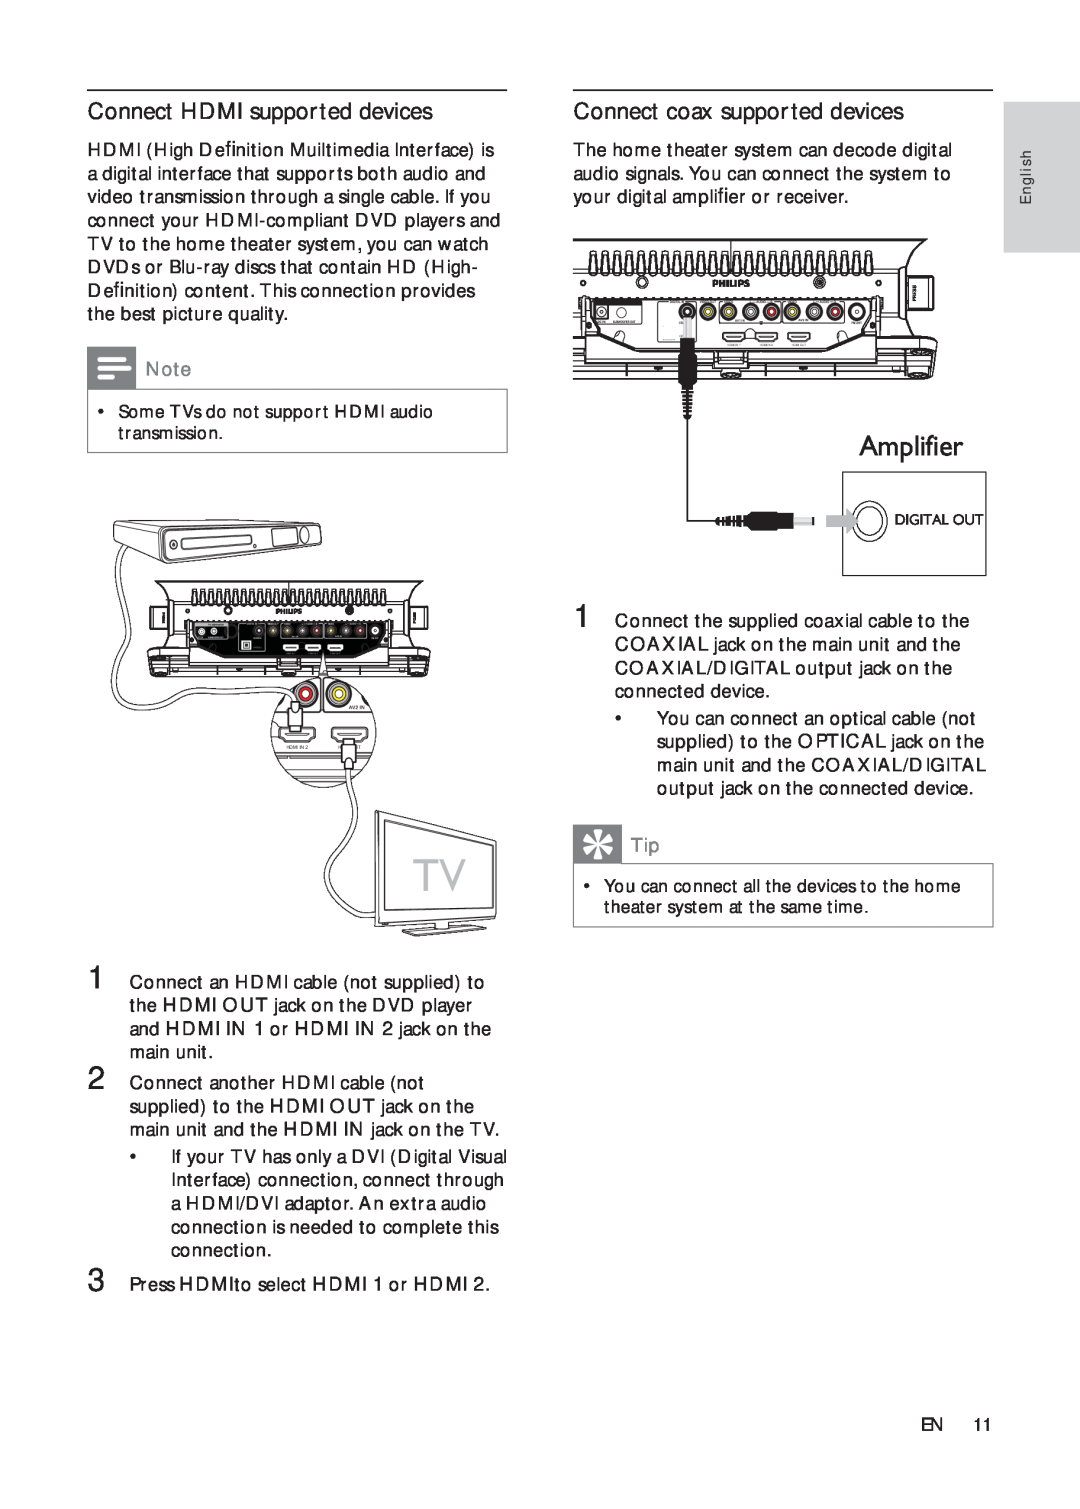 Philips HSB2313A/F7 user manual Amplifier, Connect HDMI supported devices, Connect coax supported devices 